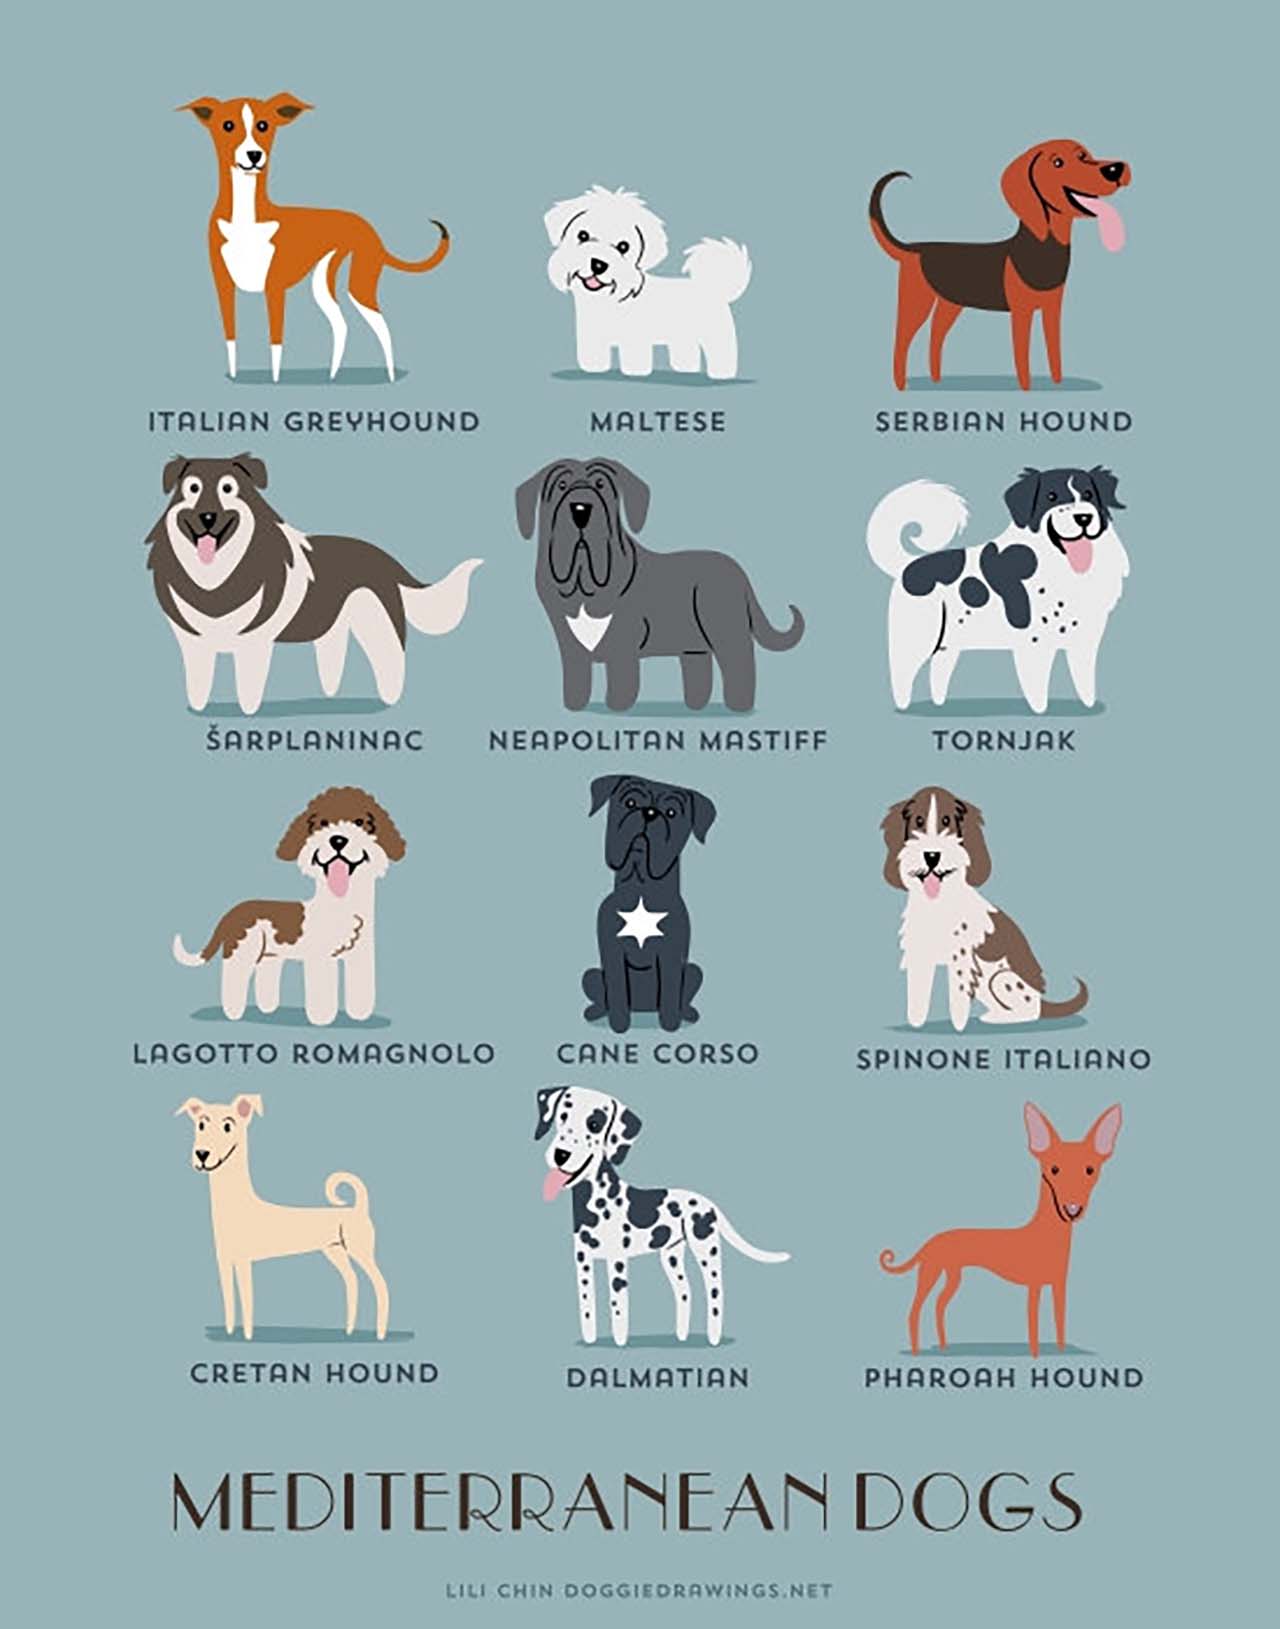 Origin Of Dogs: Cute Illustration By Lili Chin Show Where Dog Breeds Originating From #9: Mediterranean Dogs